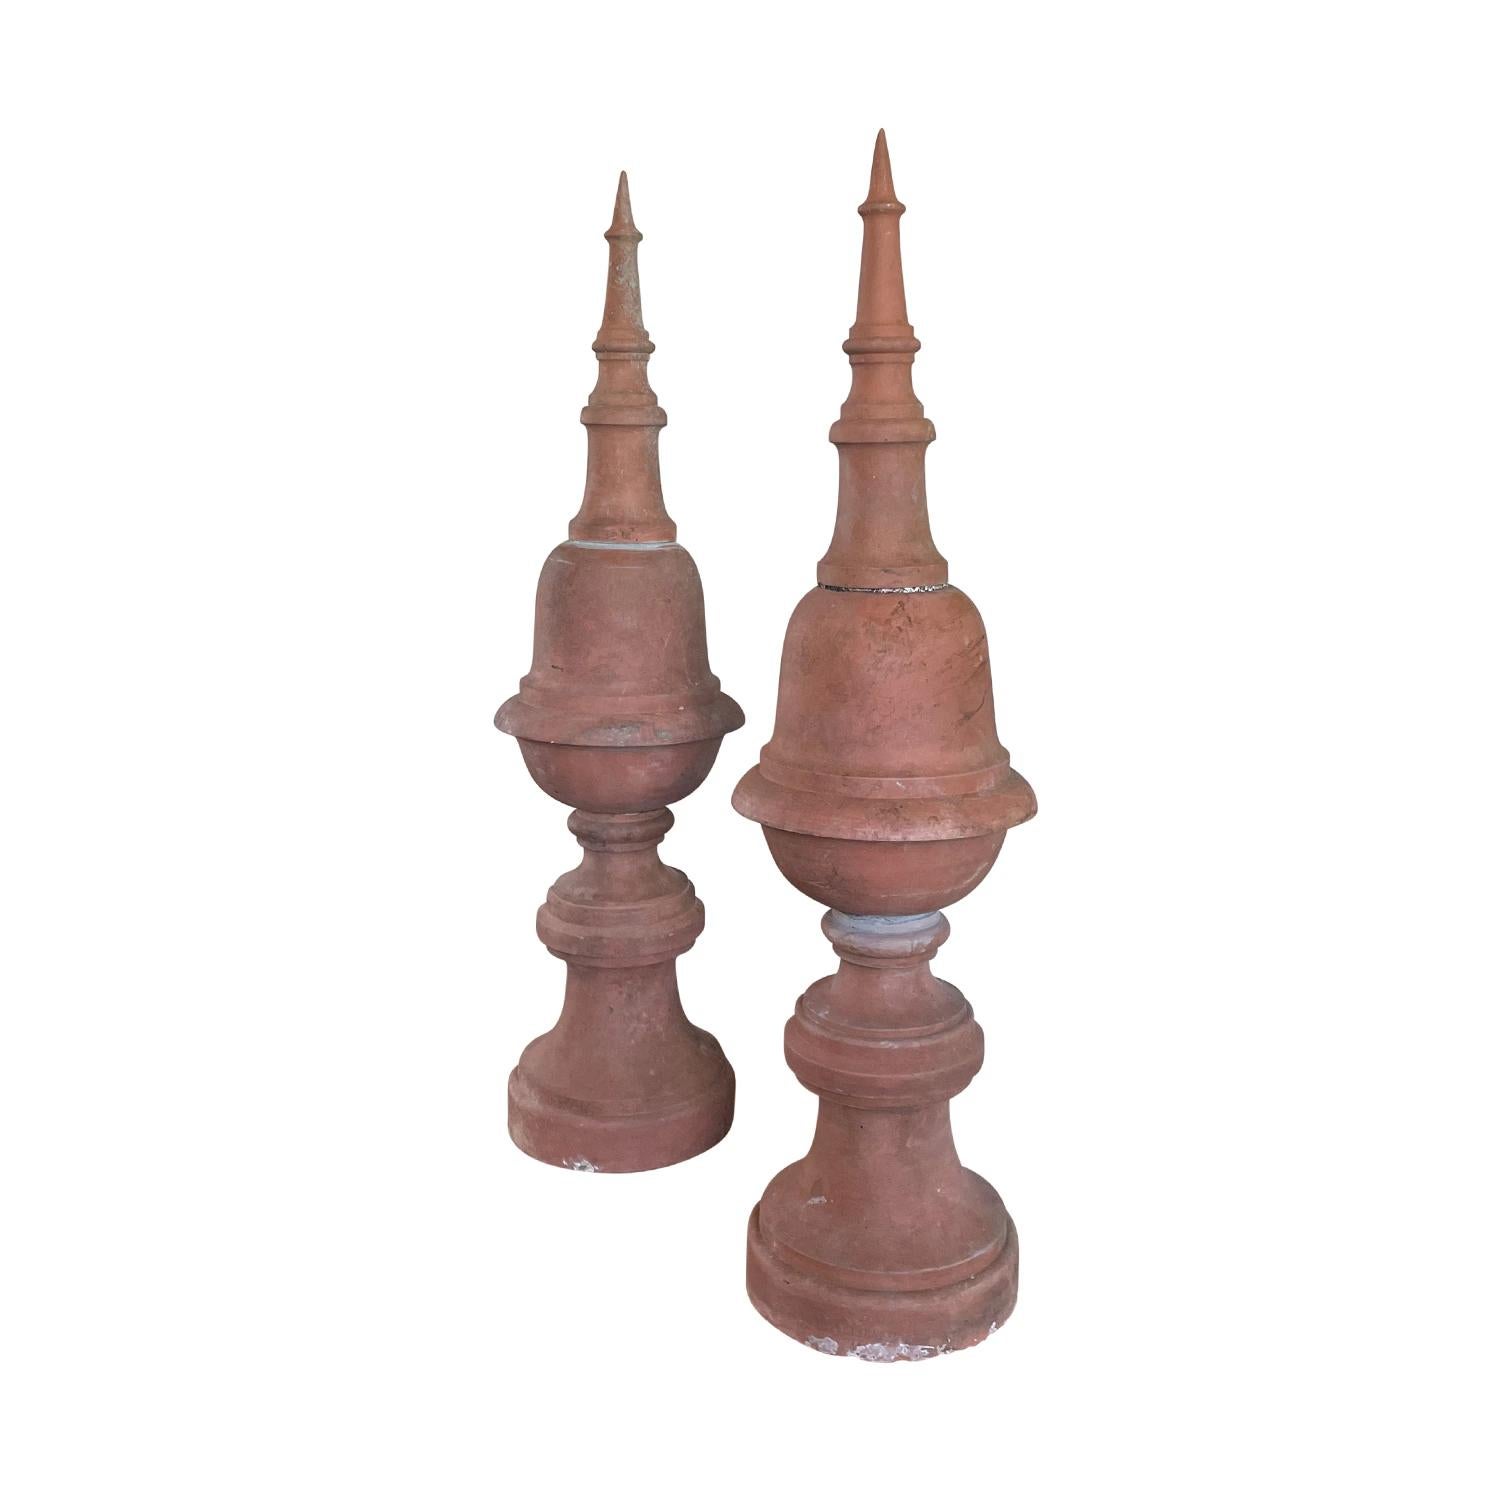 Hand-Crafted 17th Century French Pair of Terra Cotta Finials - Antique Garden Ornaments For Sale